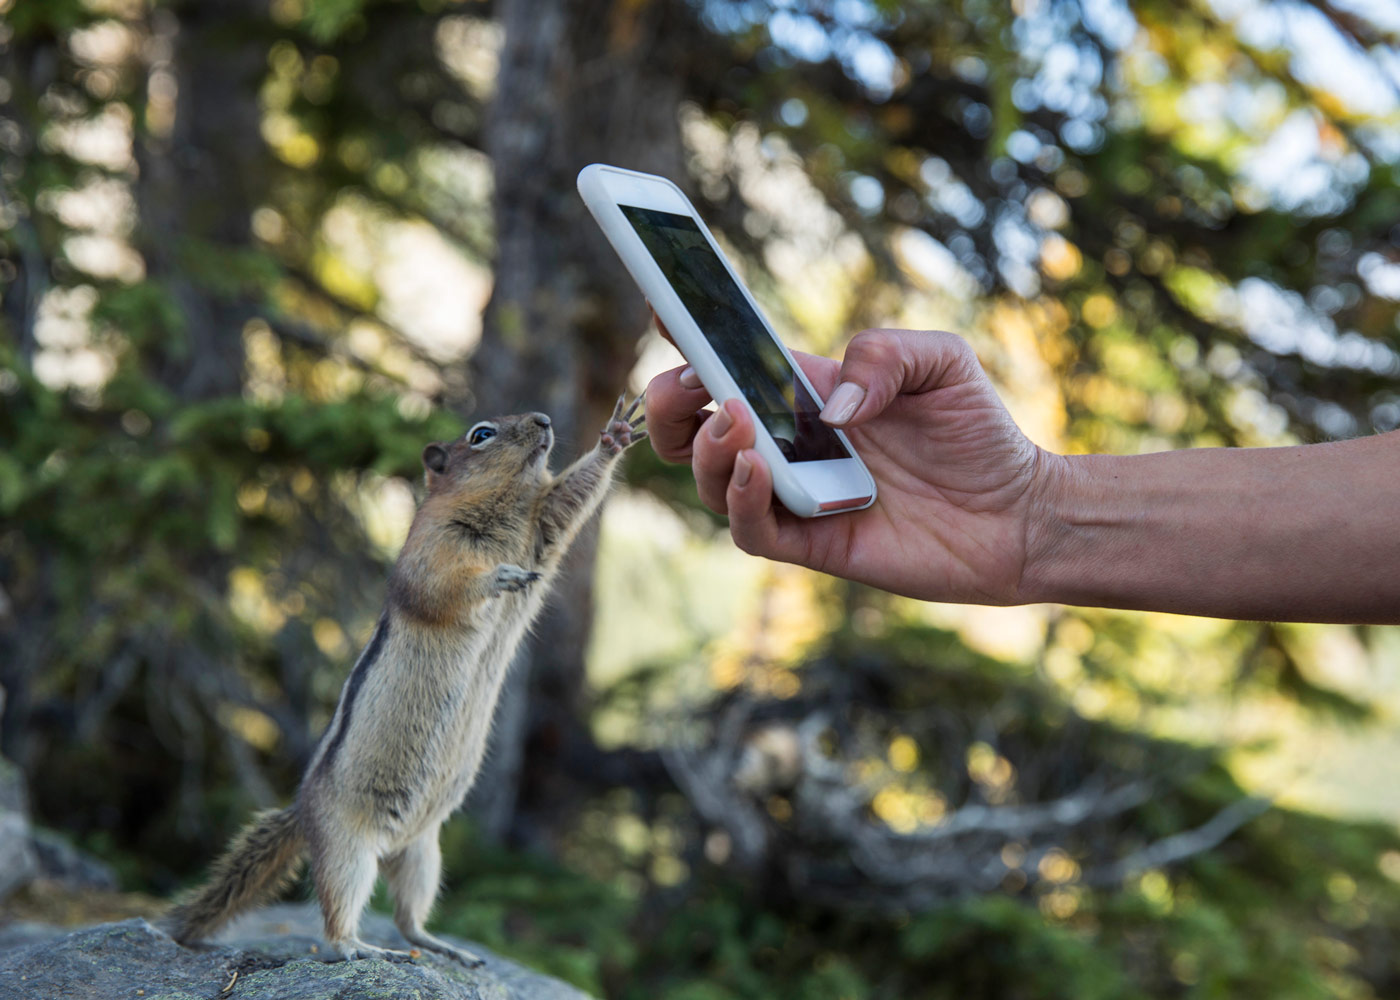 Taking a photo of a squirrel